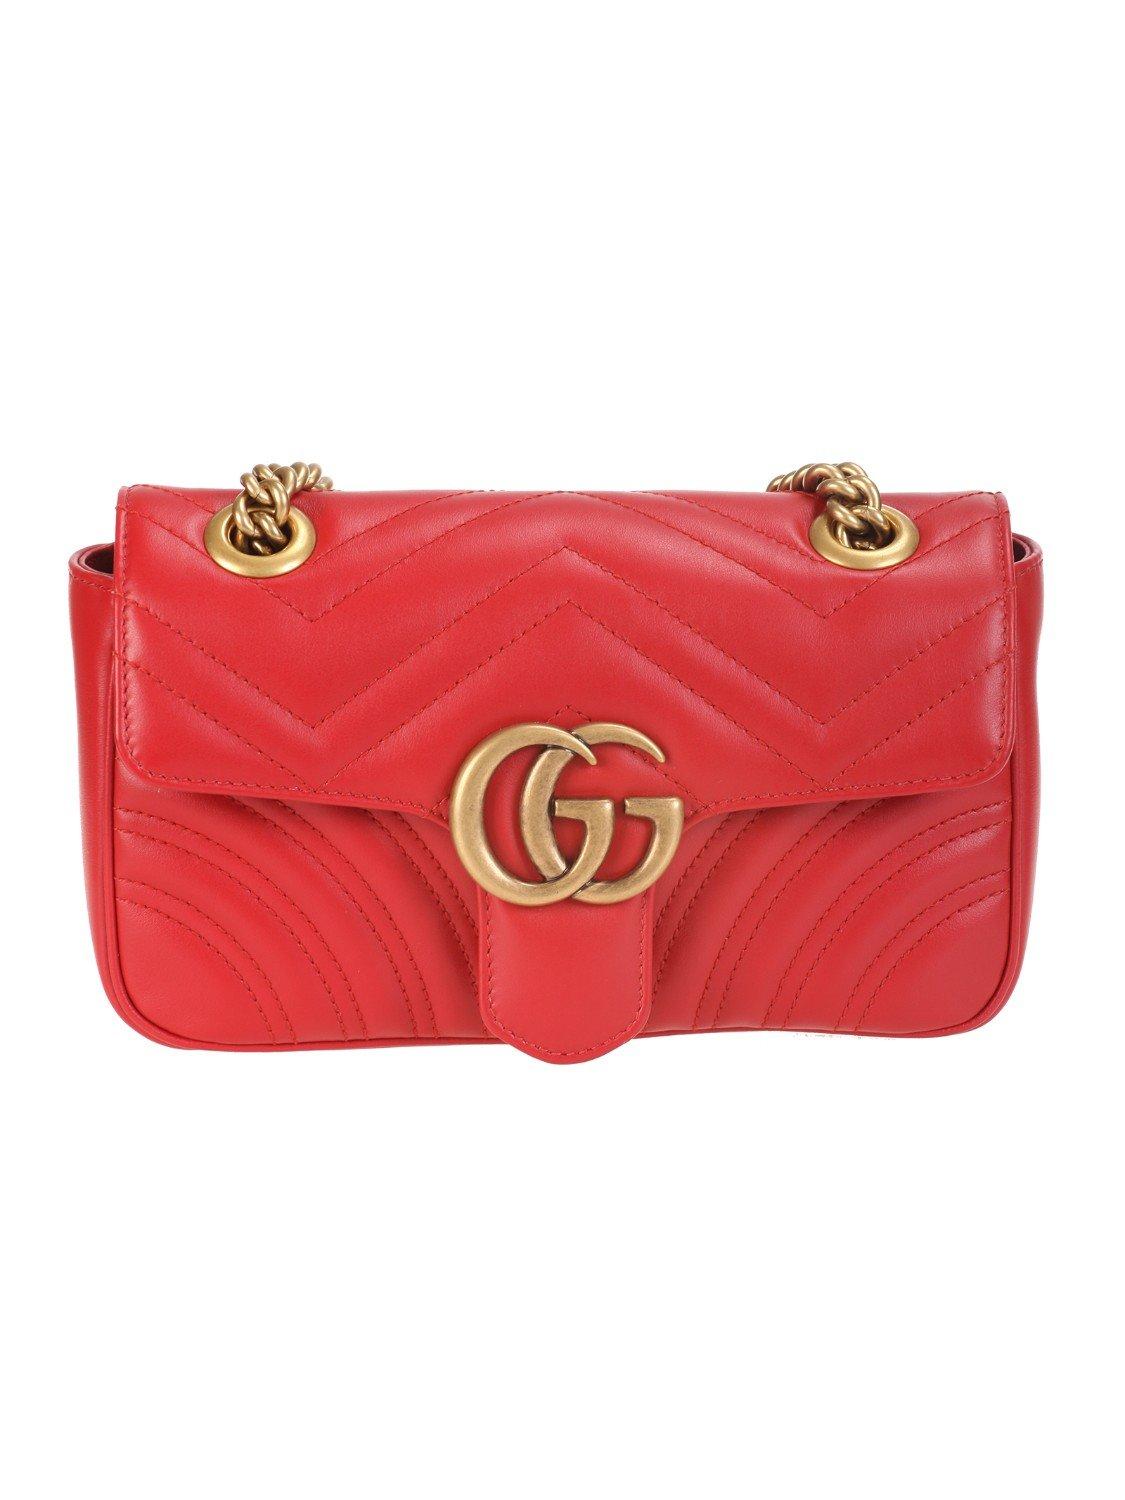 Gucci Shoulder Bag Gg Marmont Matelassè Small Size in Red - Save 23% - Lyst